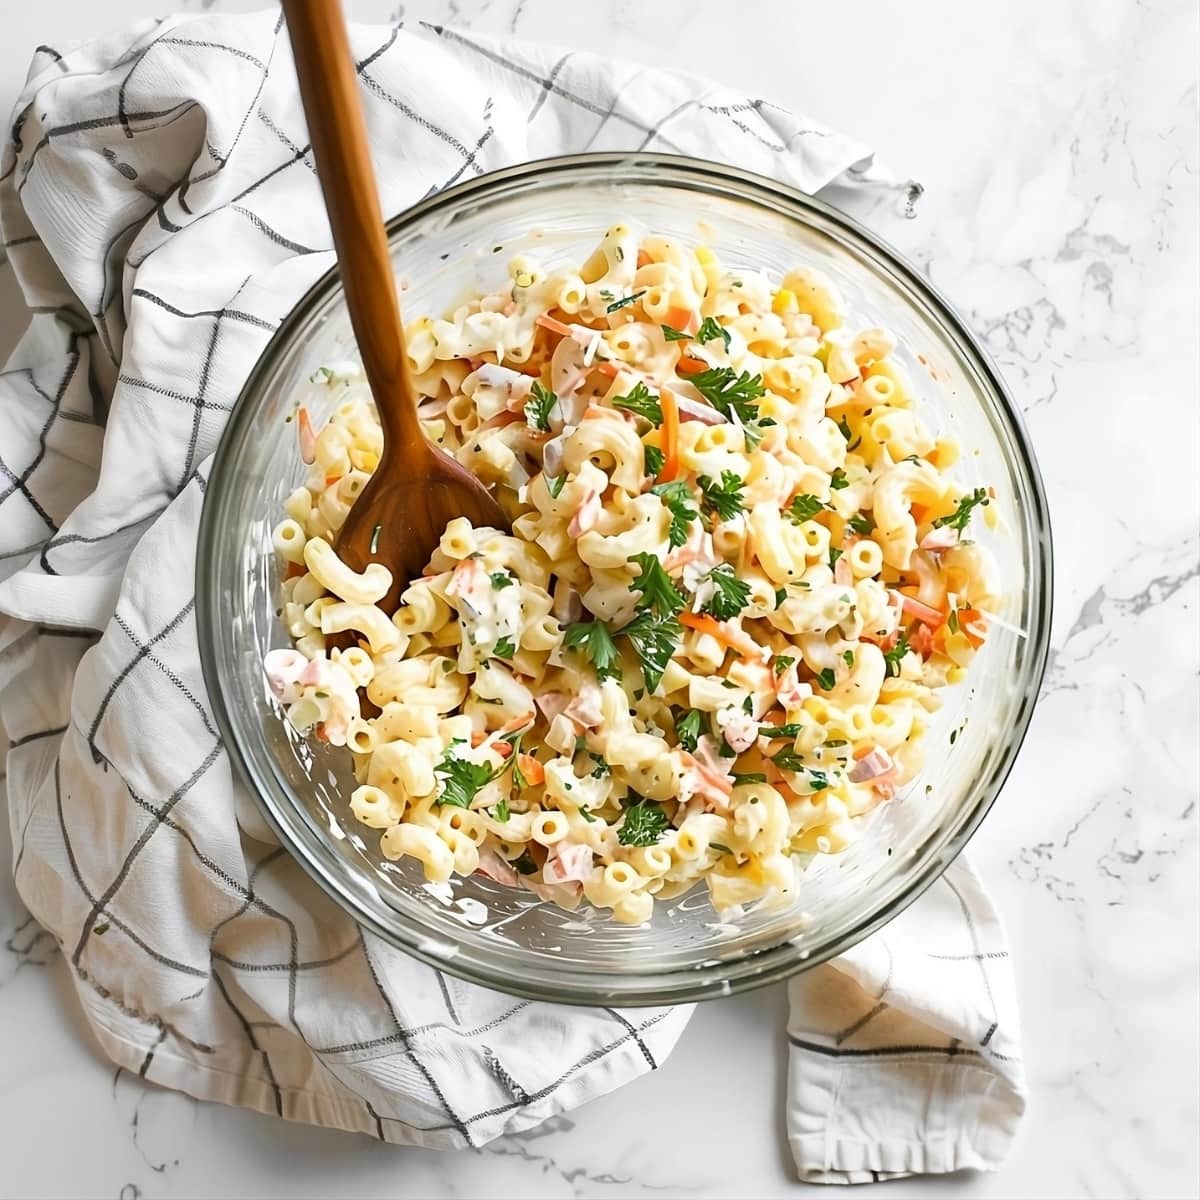 Macaroni salad tossed in a glass bowl.